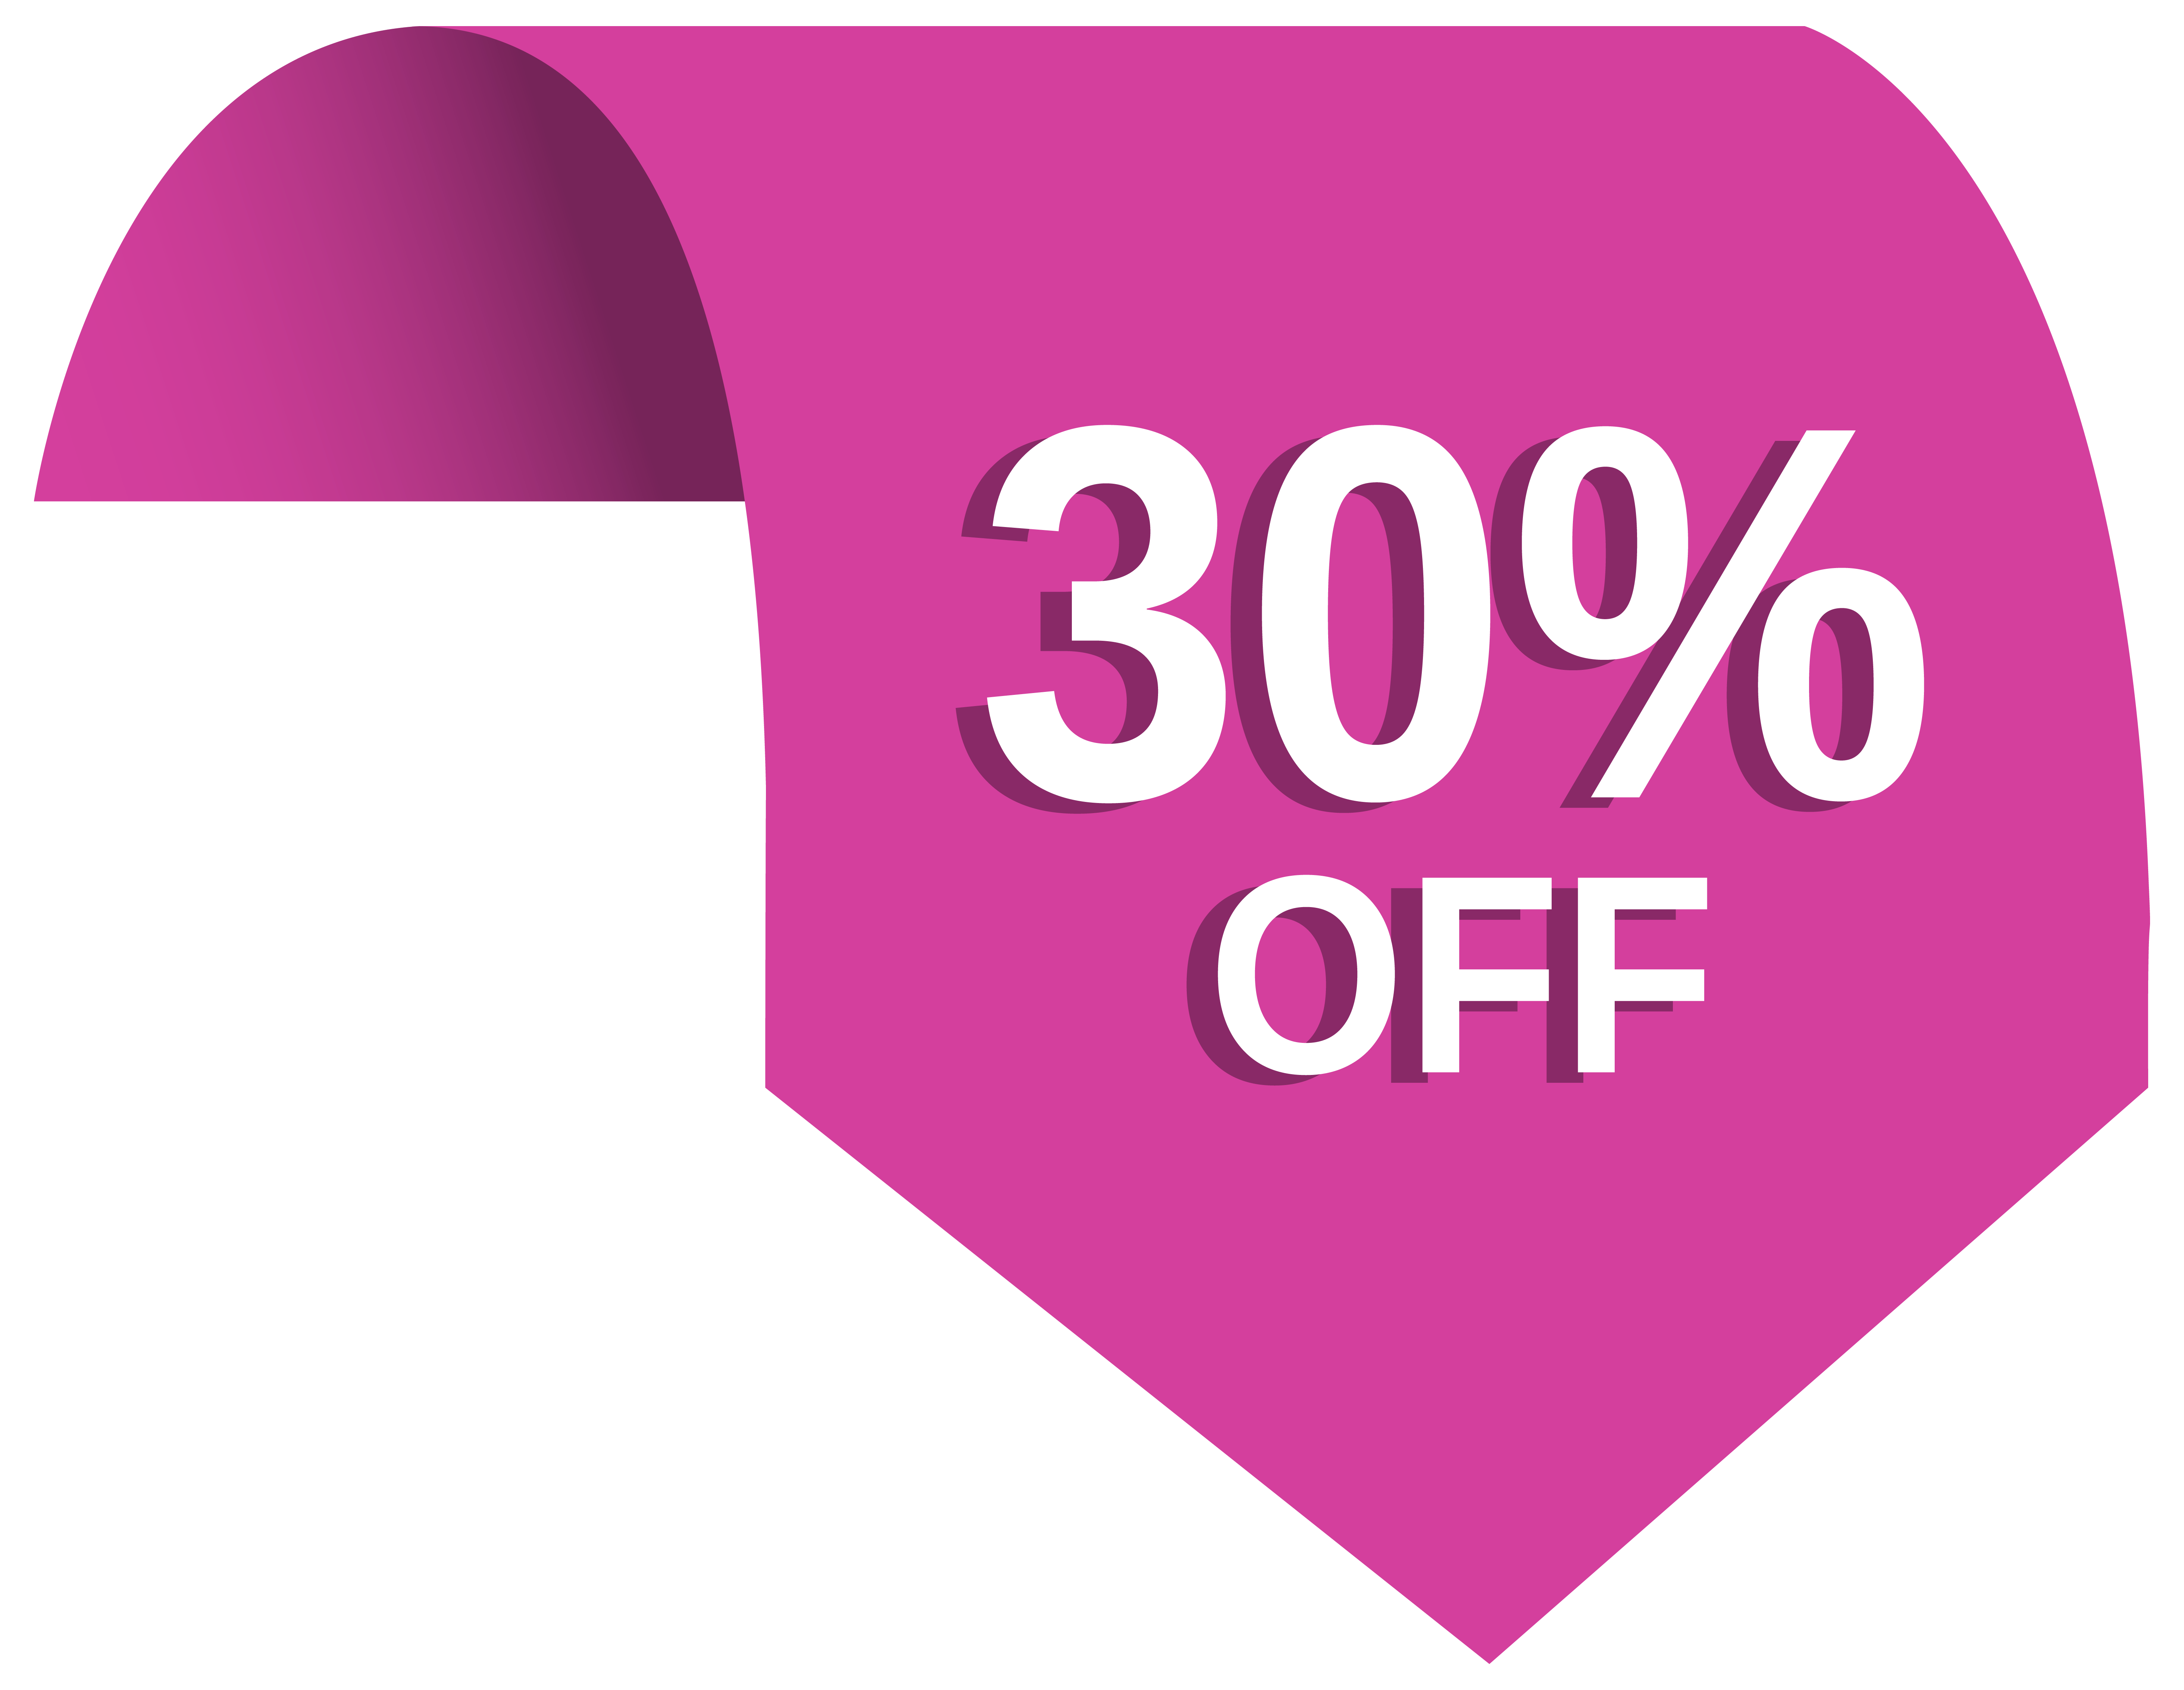  off png clip. Label clipart pink